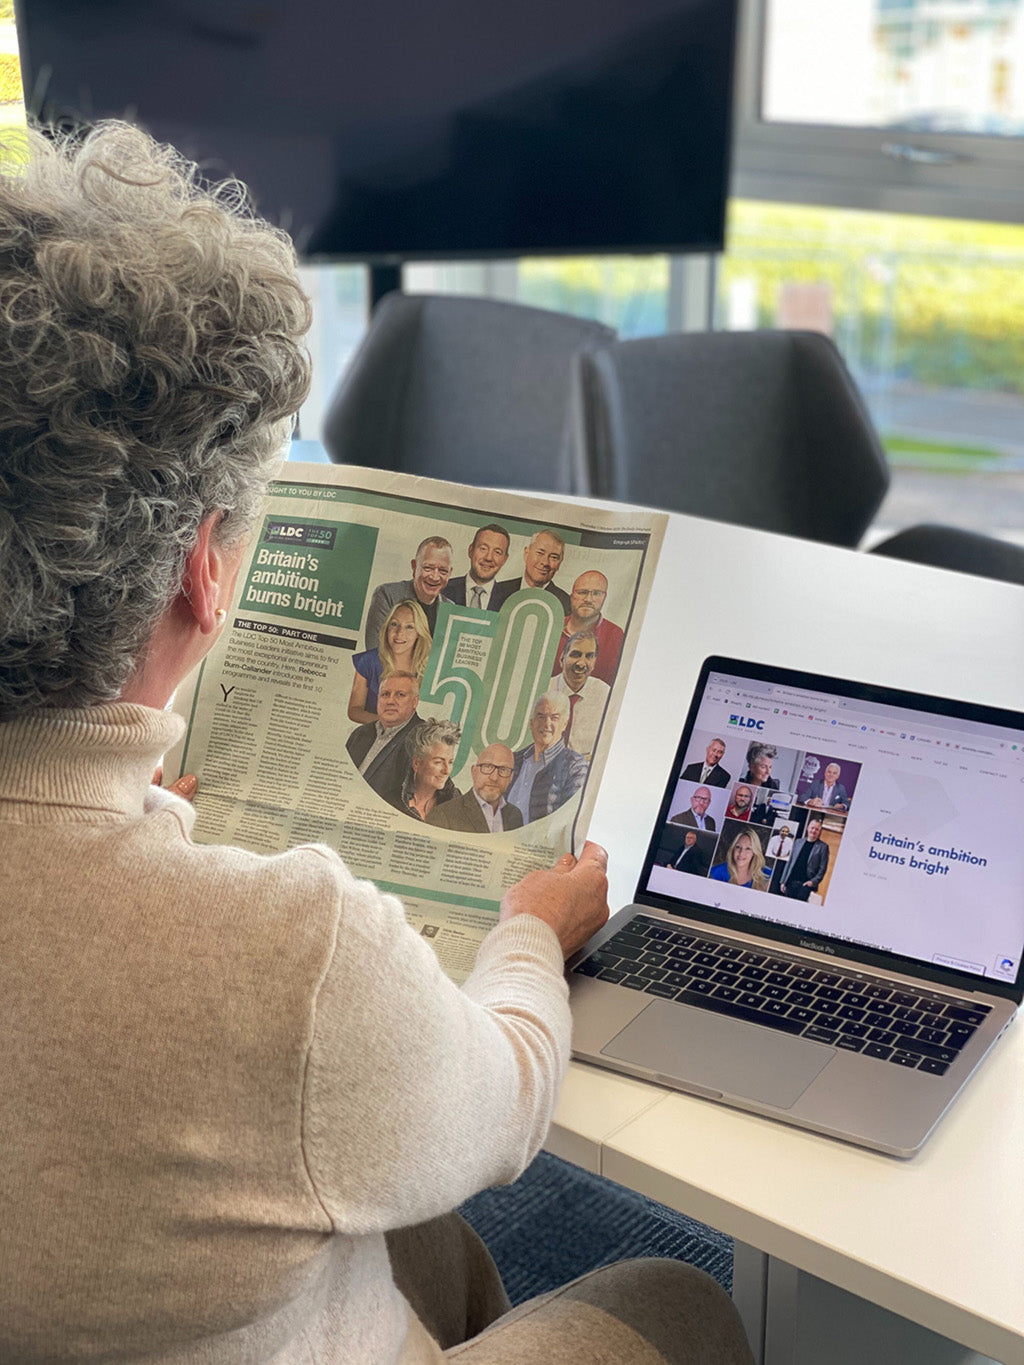 Photo showing a white woman with short silver hair sat at a laptop and holding a newspaper with her back to the camera